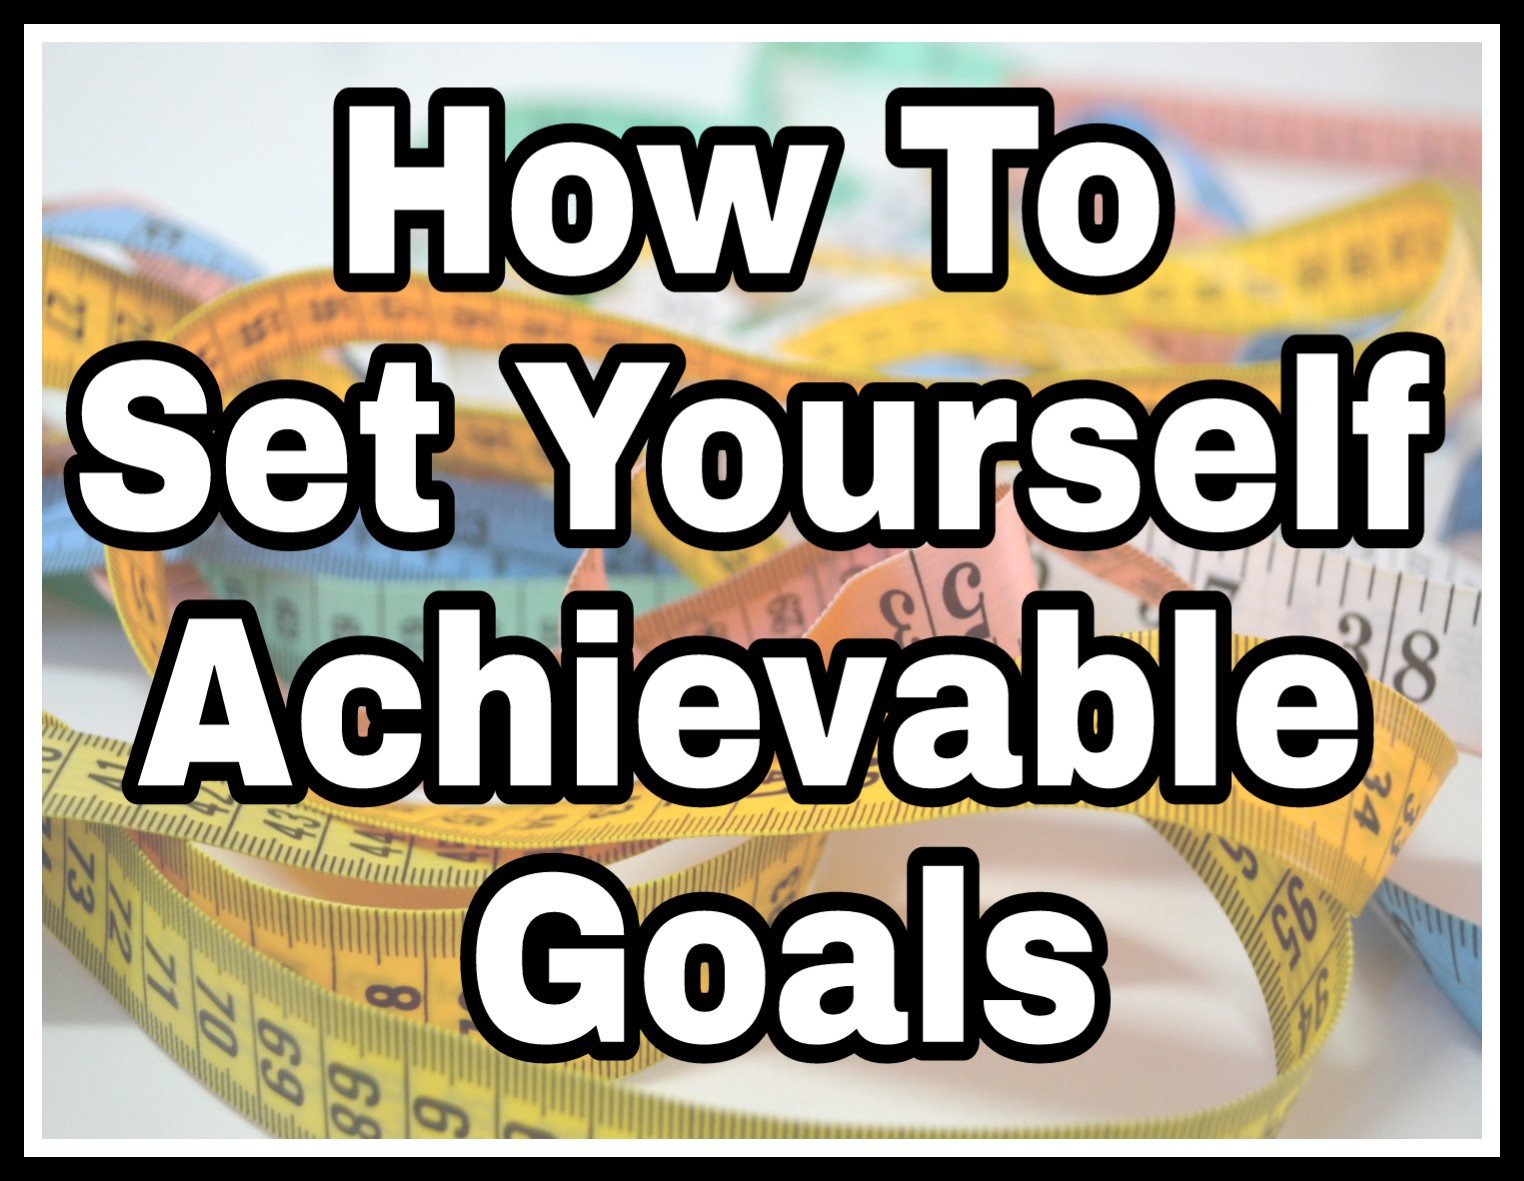 How To Set Yourself Achievable Goals title with faded tape measures image